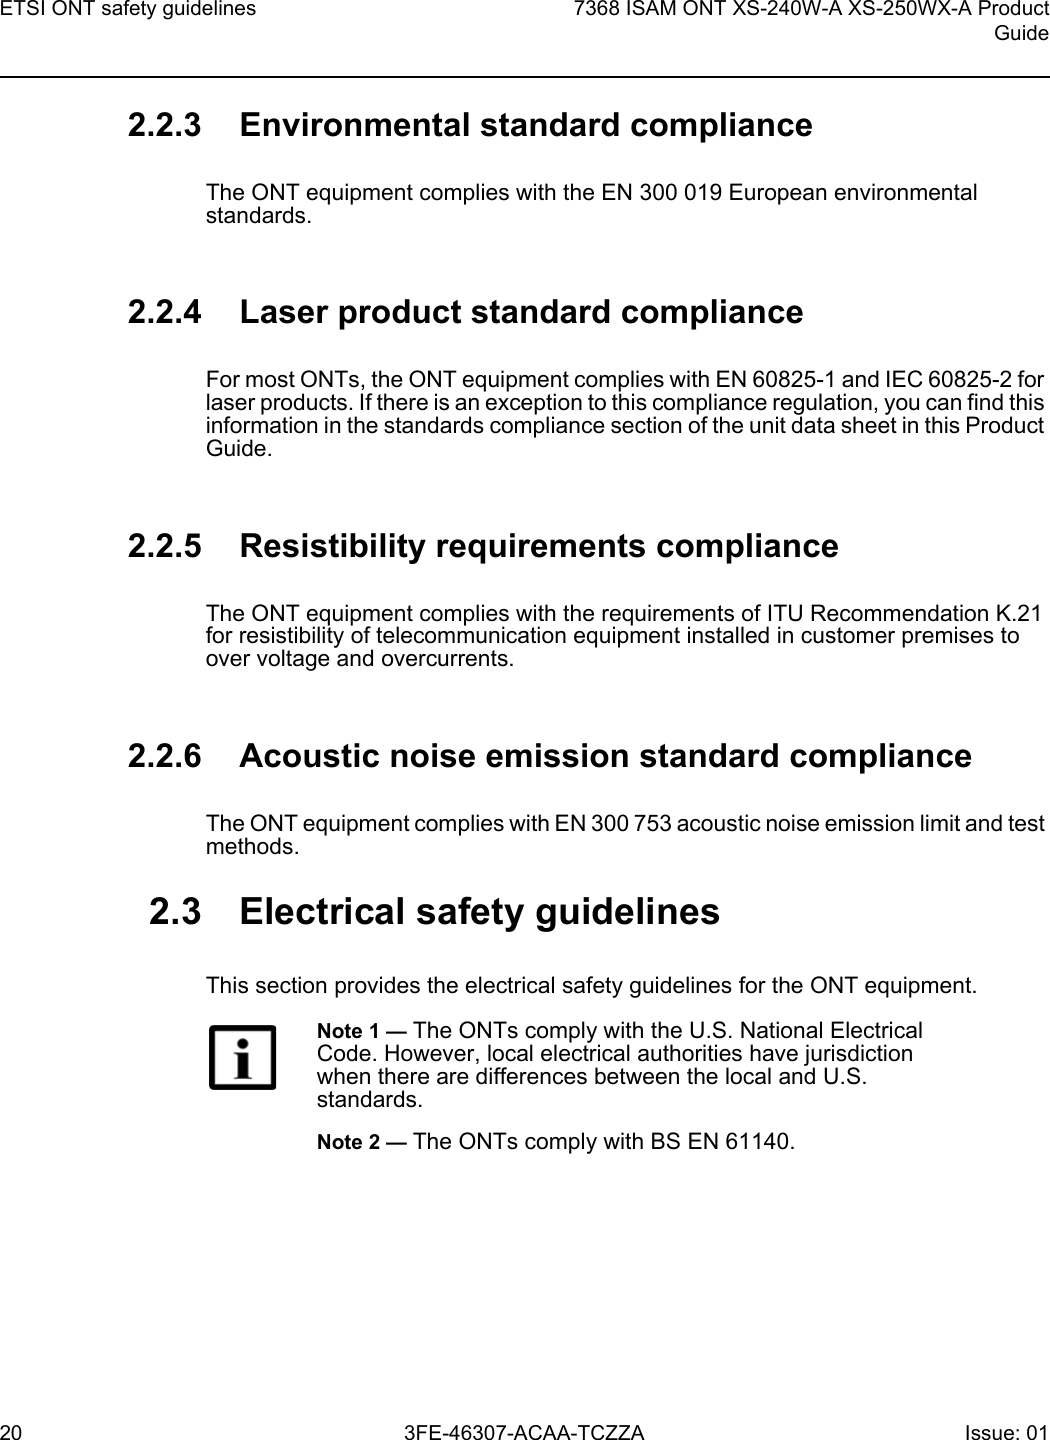 ETSI ONT safety guidelines207368 ISAM ONT XS-240W-A XS-250WX-A ProductGuide3FE-46307-ACAA-TCZZA Issue: 01 2.2.3 Environmental standard complianceThe ONT equipment complies with the EN 300 019 European environmental standards.2.2.4 Laser product standard complianceFor most ONTs, the ONT equipment complies with EN 60825-1 and IEC 60825-2 for laser products. If there is an exception to this compliance regulation, you can find this information in the standards compliance section of the unit data sheet in this Product Guide.2.2.5 Resistibility requirements complianceThe ONT equipment complies with the requirements of ITU Recommendation K.21 for resistibility of telecommunication equipment installed in customer premises to over voltage and overcurrents.2.2.6 Acoustic noise emission standard complianceThe ONT equipment complies with EN 300 753 acoustic noise emission limit and test methods. 2.3 Electrical safety guidelinesThis section provides the electrical safety guidelines for the ONT equipment.Note 1 — The ONTs comply with the U.S. National Electrical Code. However, local electrical authorities have jurisdiction when there are differences between the local and U.S. standards.Note 2 — The ONTs comply with BS EN 61140.